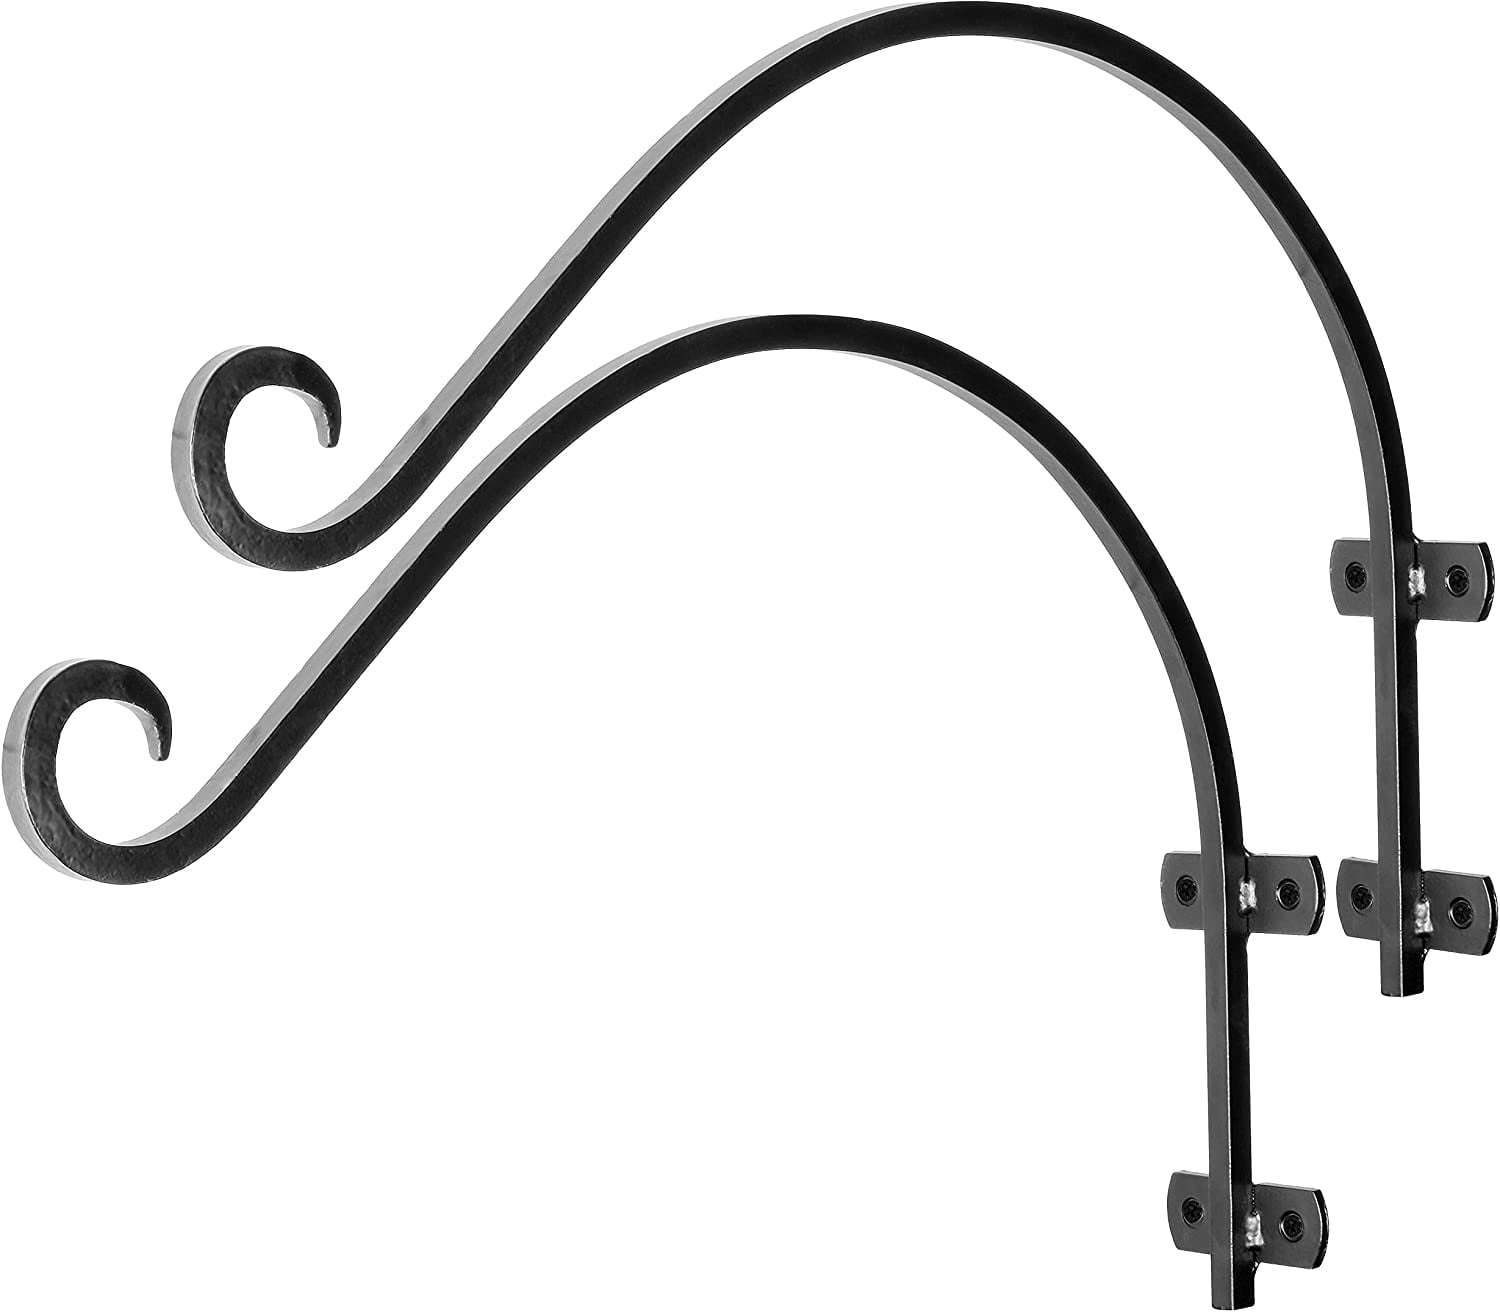 Wrought iron Decorative S-Hook Plant hangers MADE in America! Mix & Match 